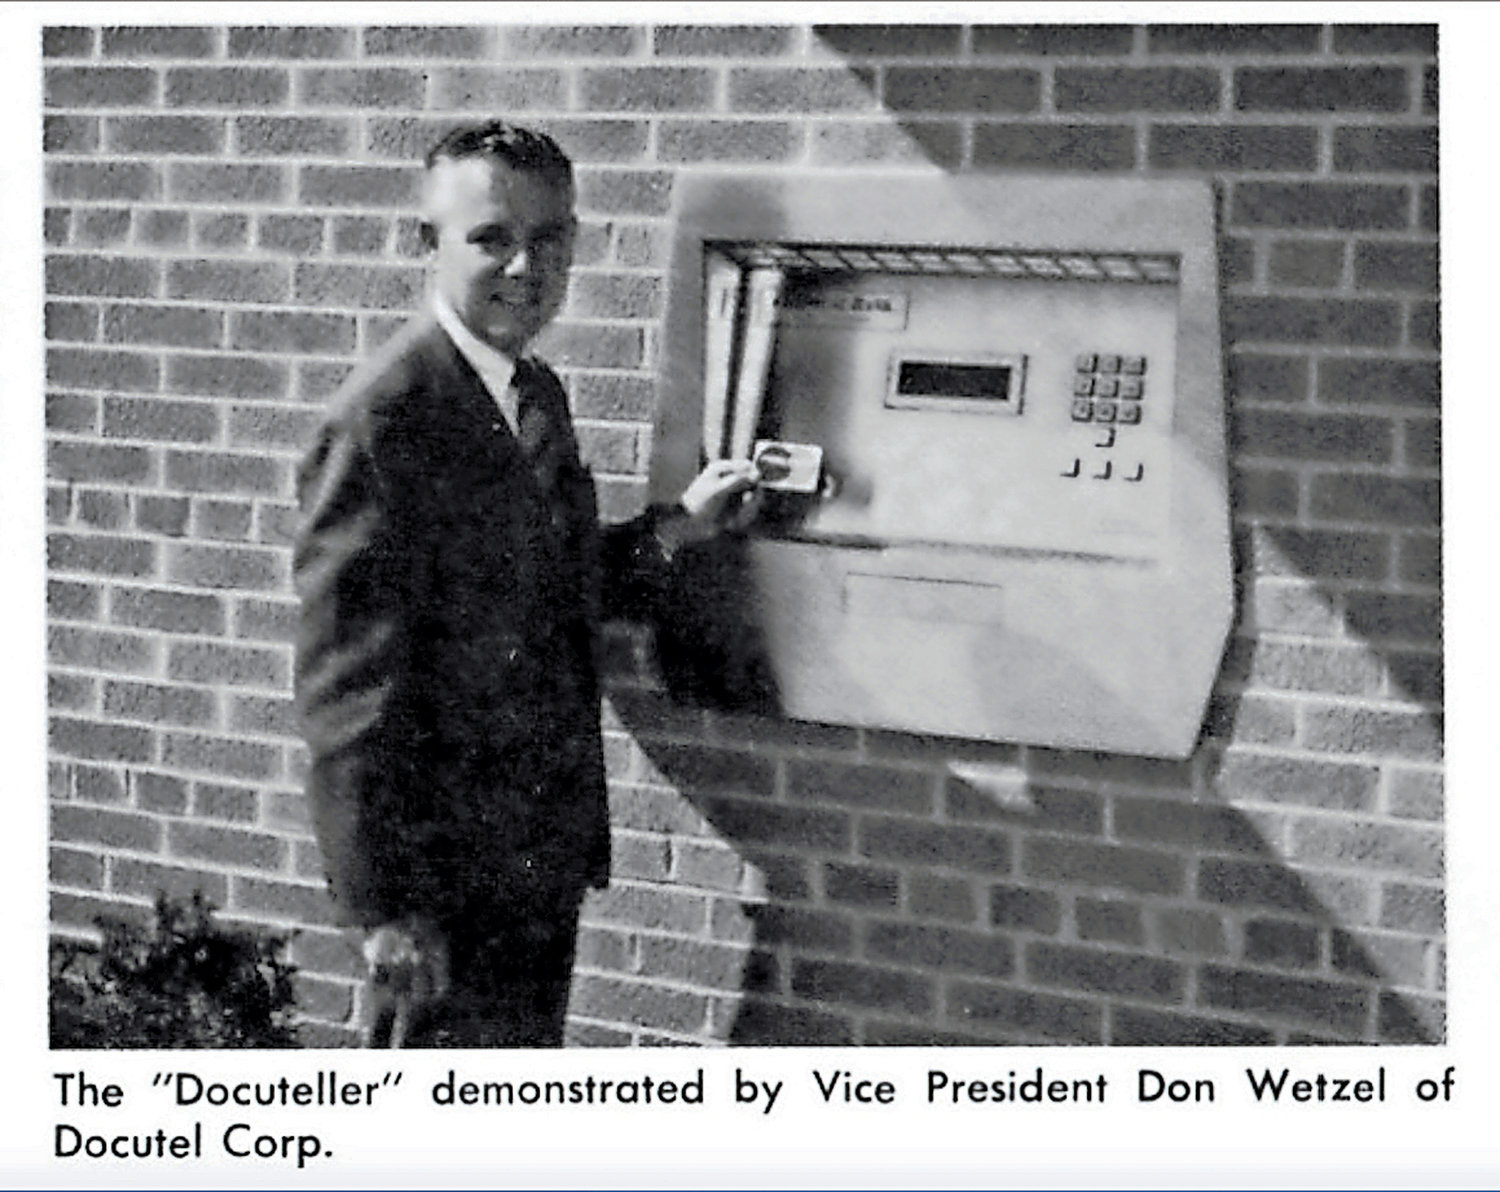 Don Wetzel, inventor of the ATM, left, will be in Rockville Centre for a 50th anniversary celebration on Sept. 6.